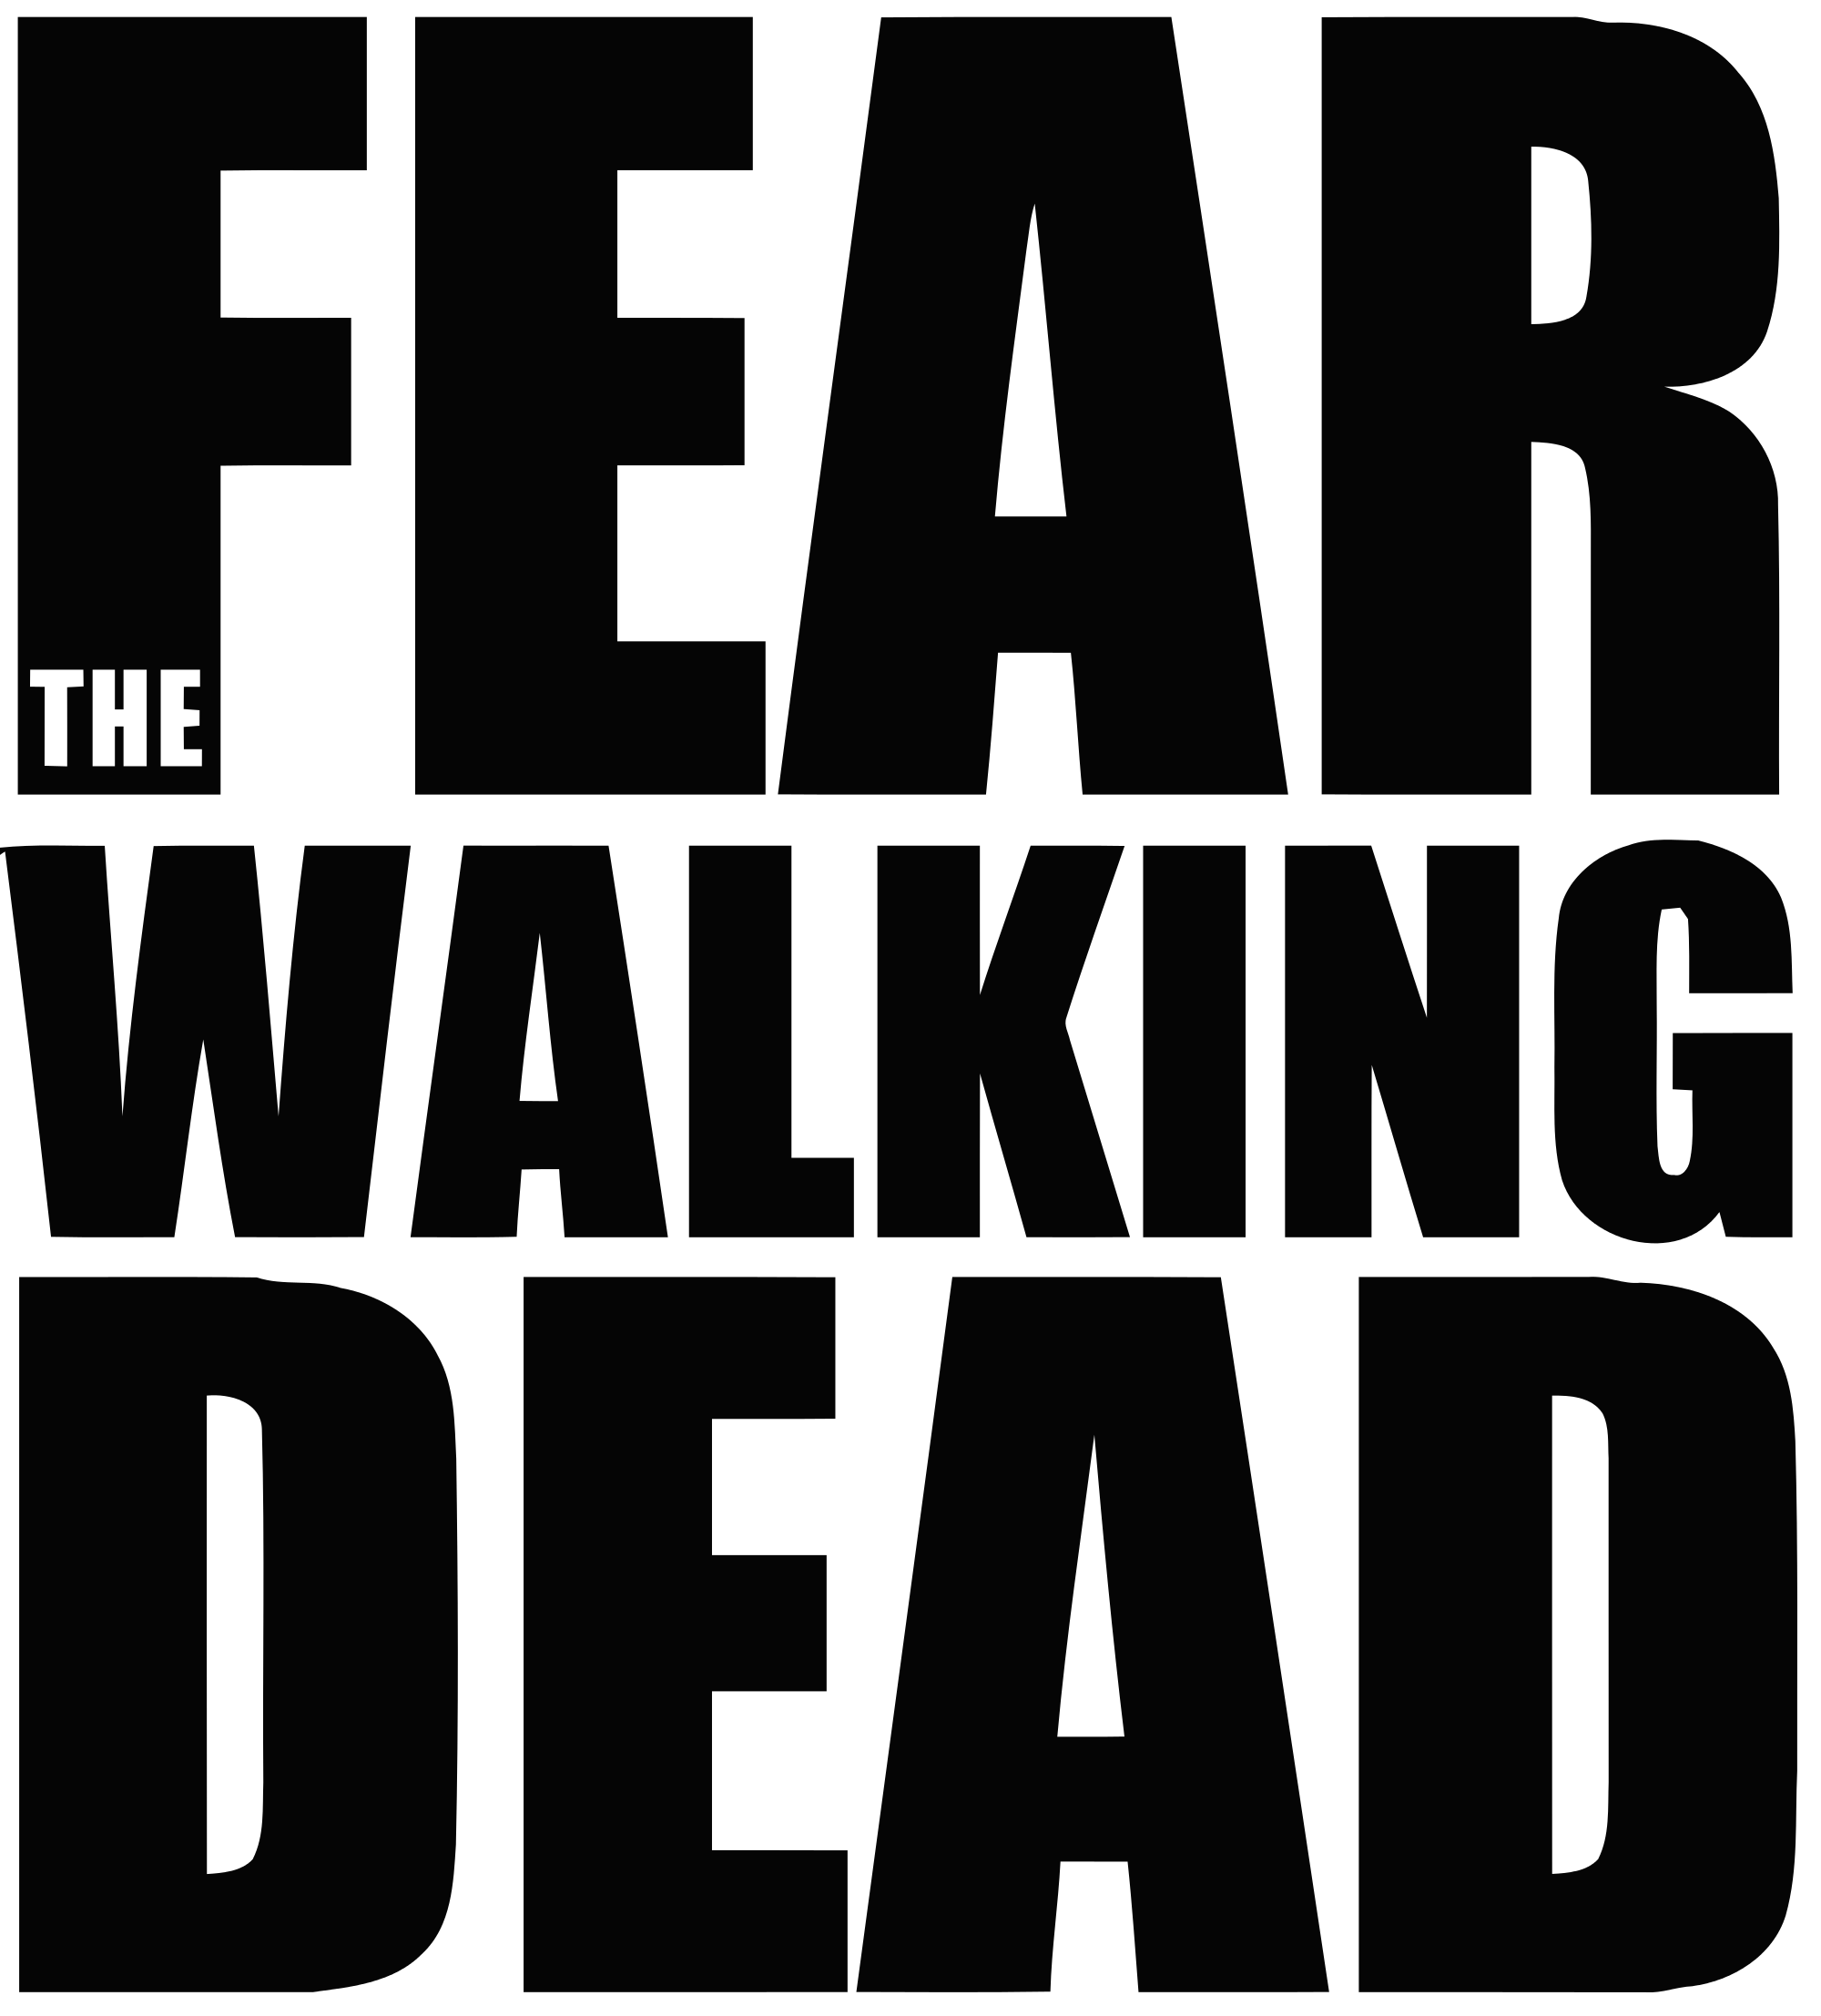 The Walking Dead High Quality Background on Wallpapers Vista